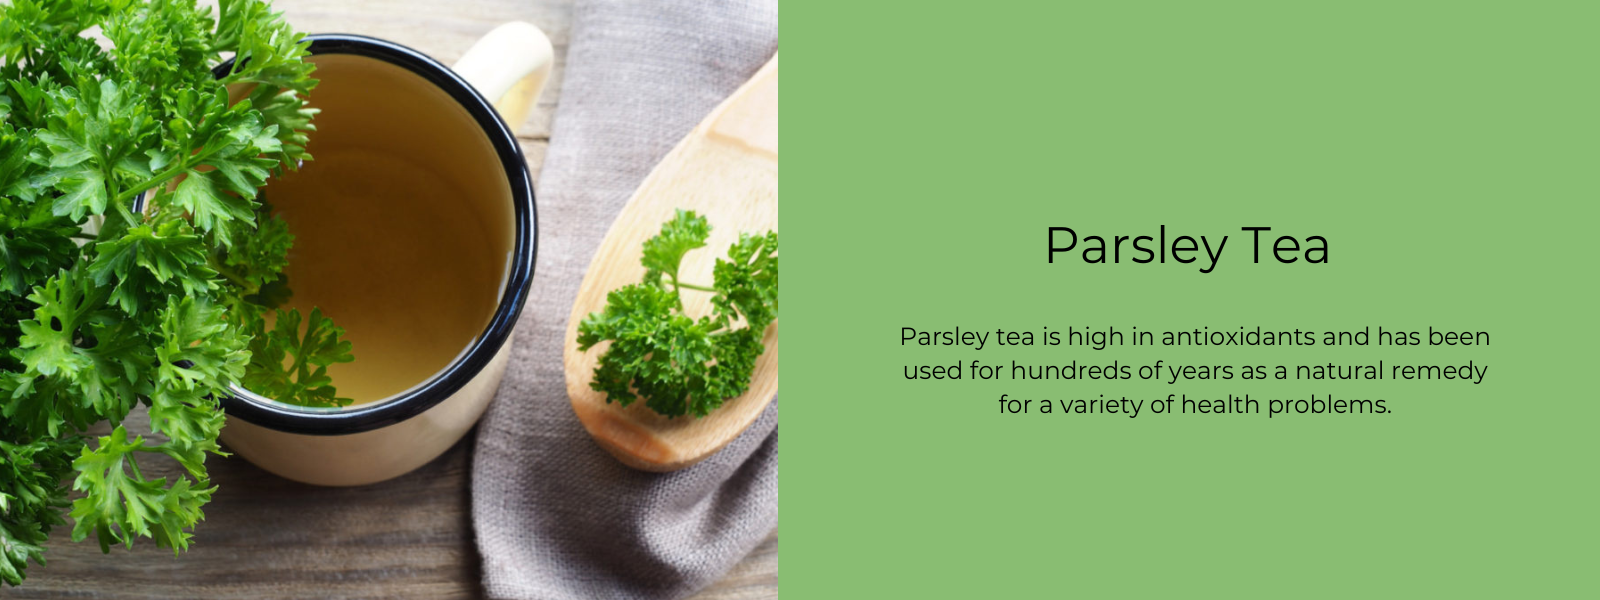 Parsley Tea - Health Benefits, Uses and Important Facts